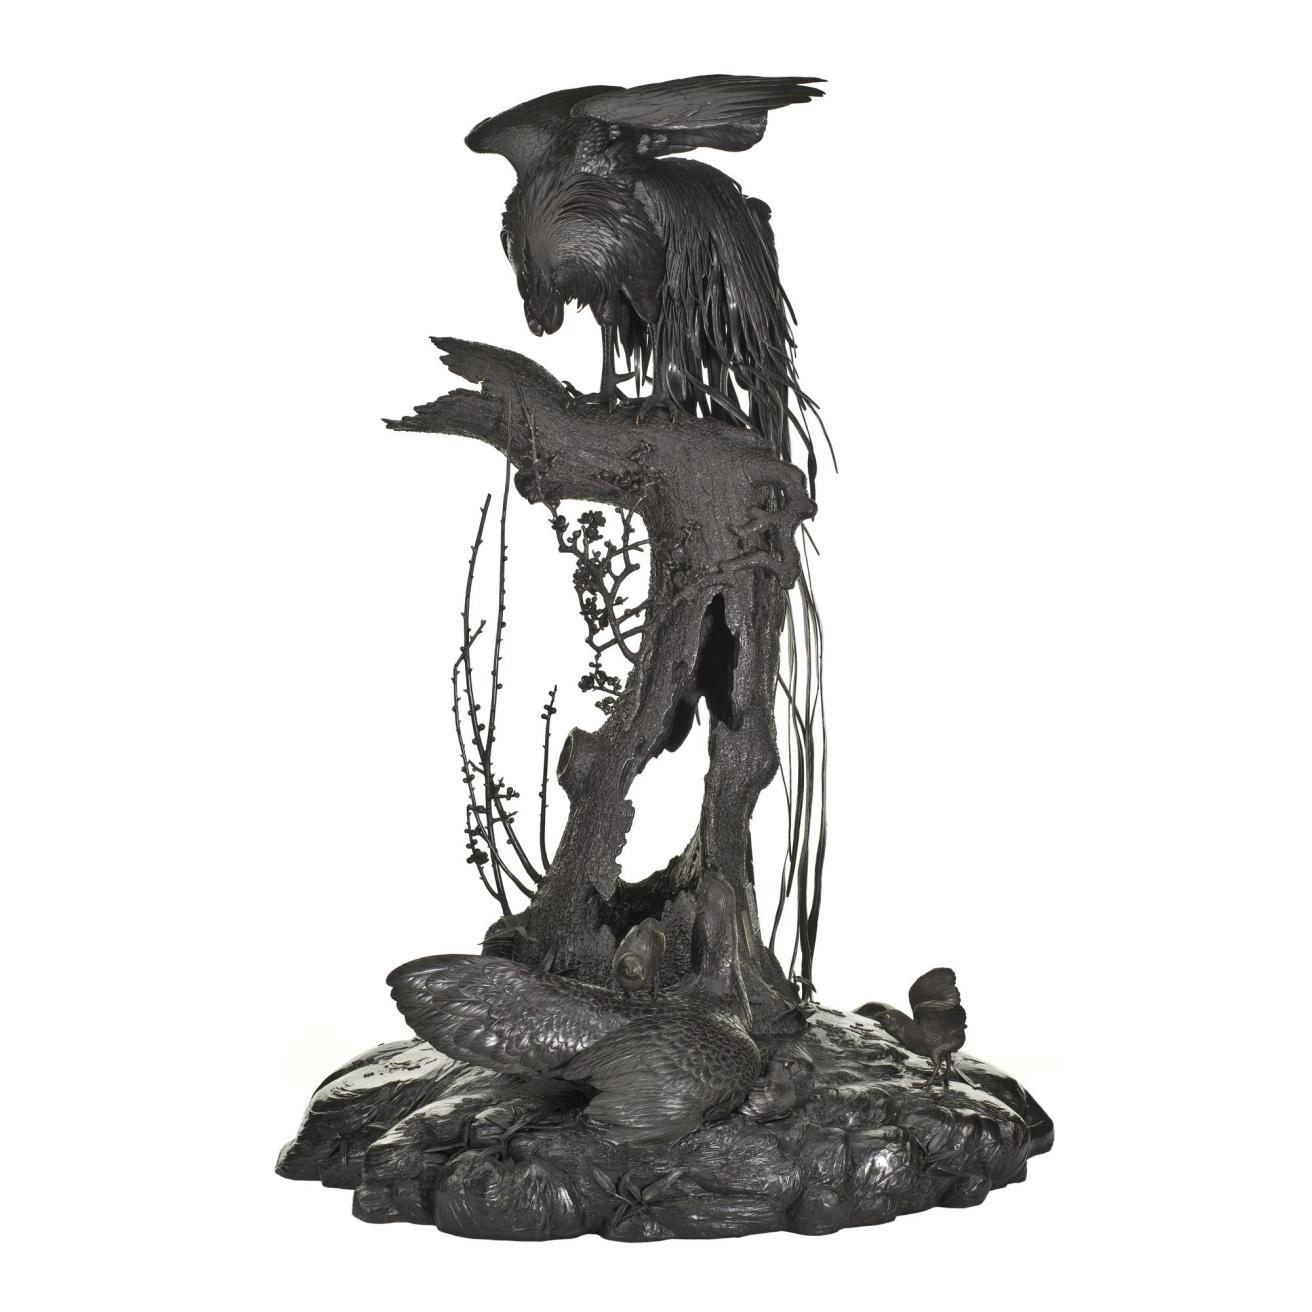 Bronze sculpture of a cockerel with wings spread standing on a tree stump with a hen and three chicks below: Japan, Tokyo, by Ōtake Norikuni, 1890-1900.